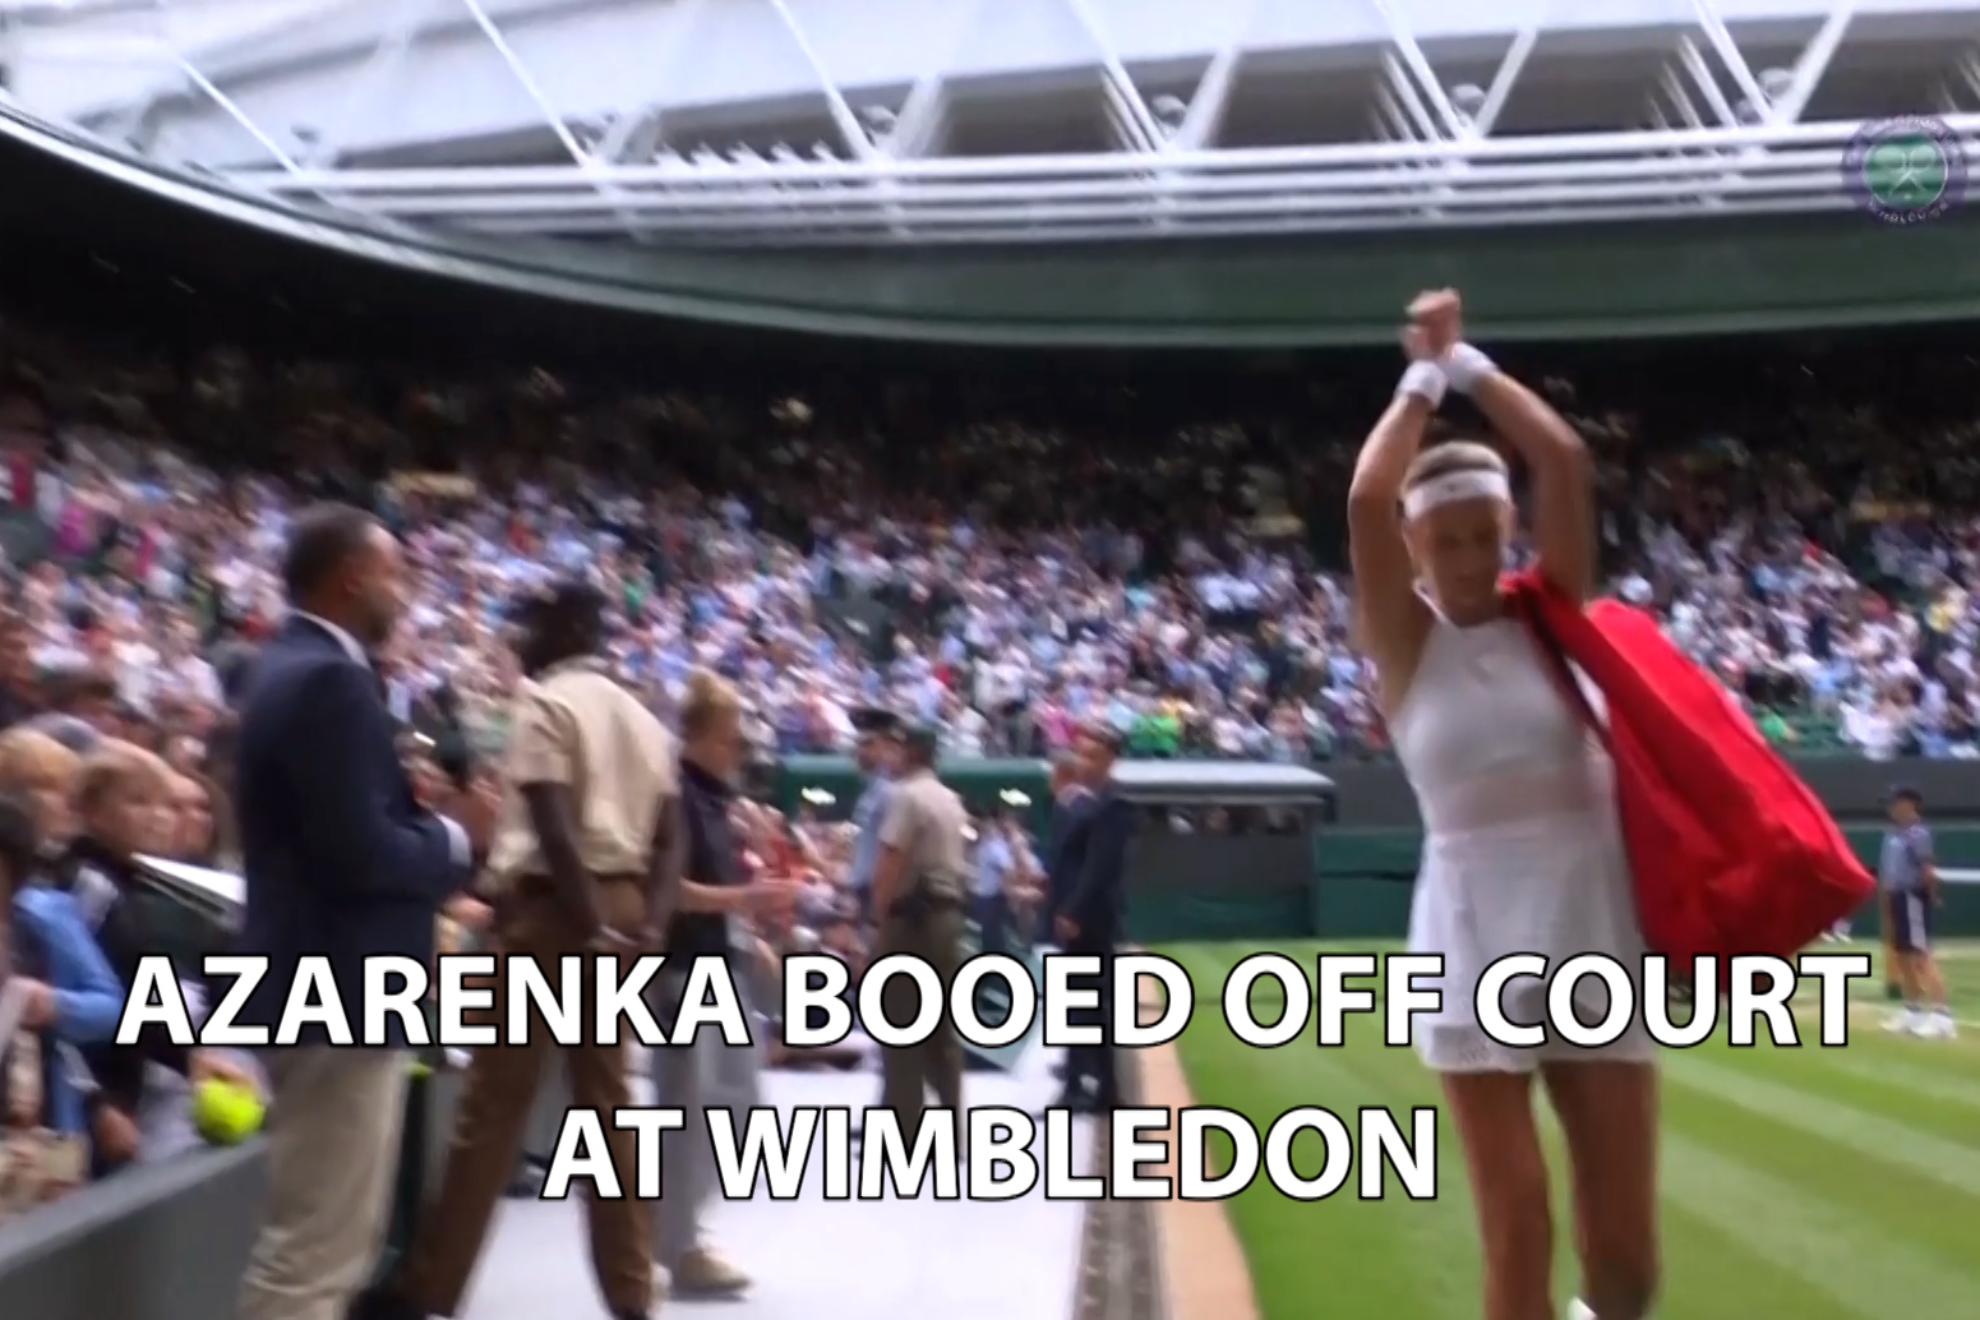 Controversy at Wimbledon: Azarenka booed off court after losing to Svitolina